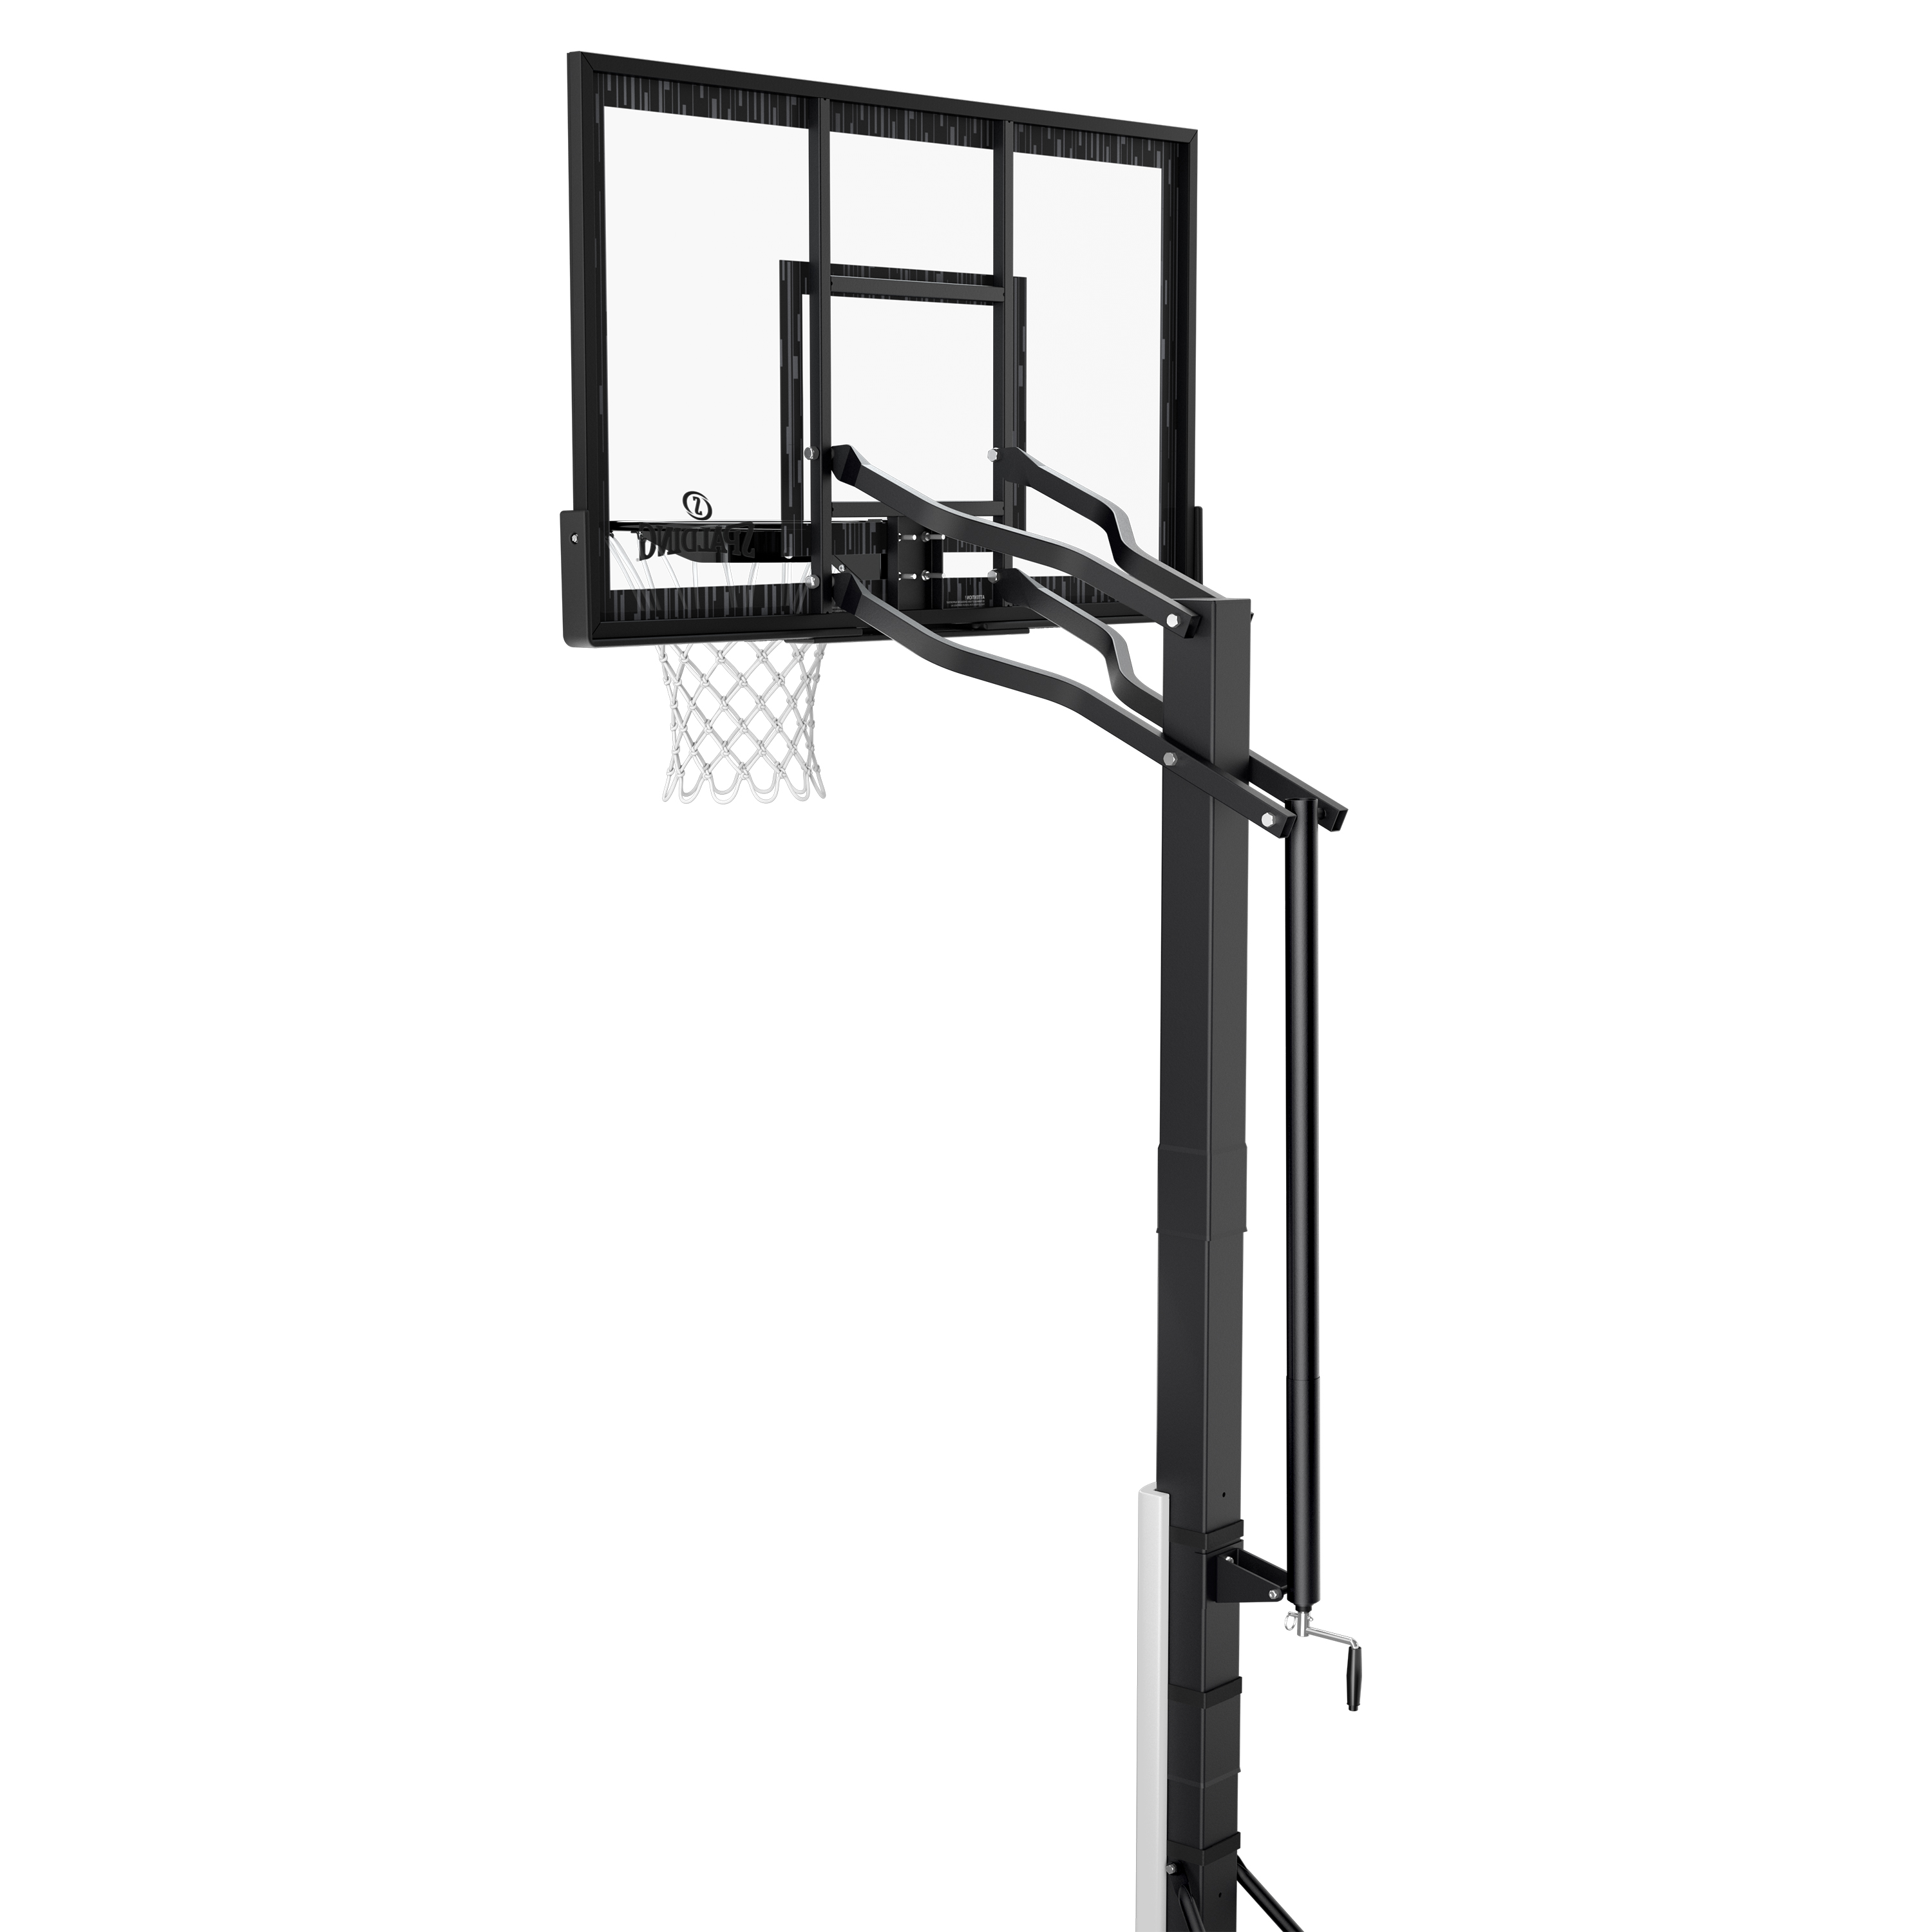 Spalding 60 inch Acrylic Screw Jack Portable Basketball Hoop System - image 5 of 11